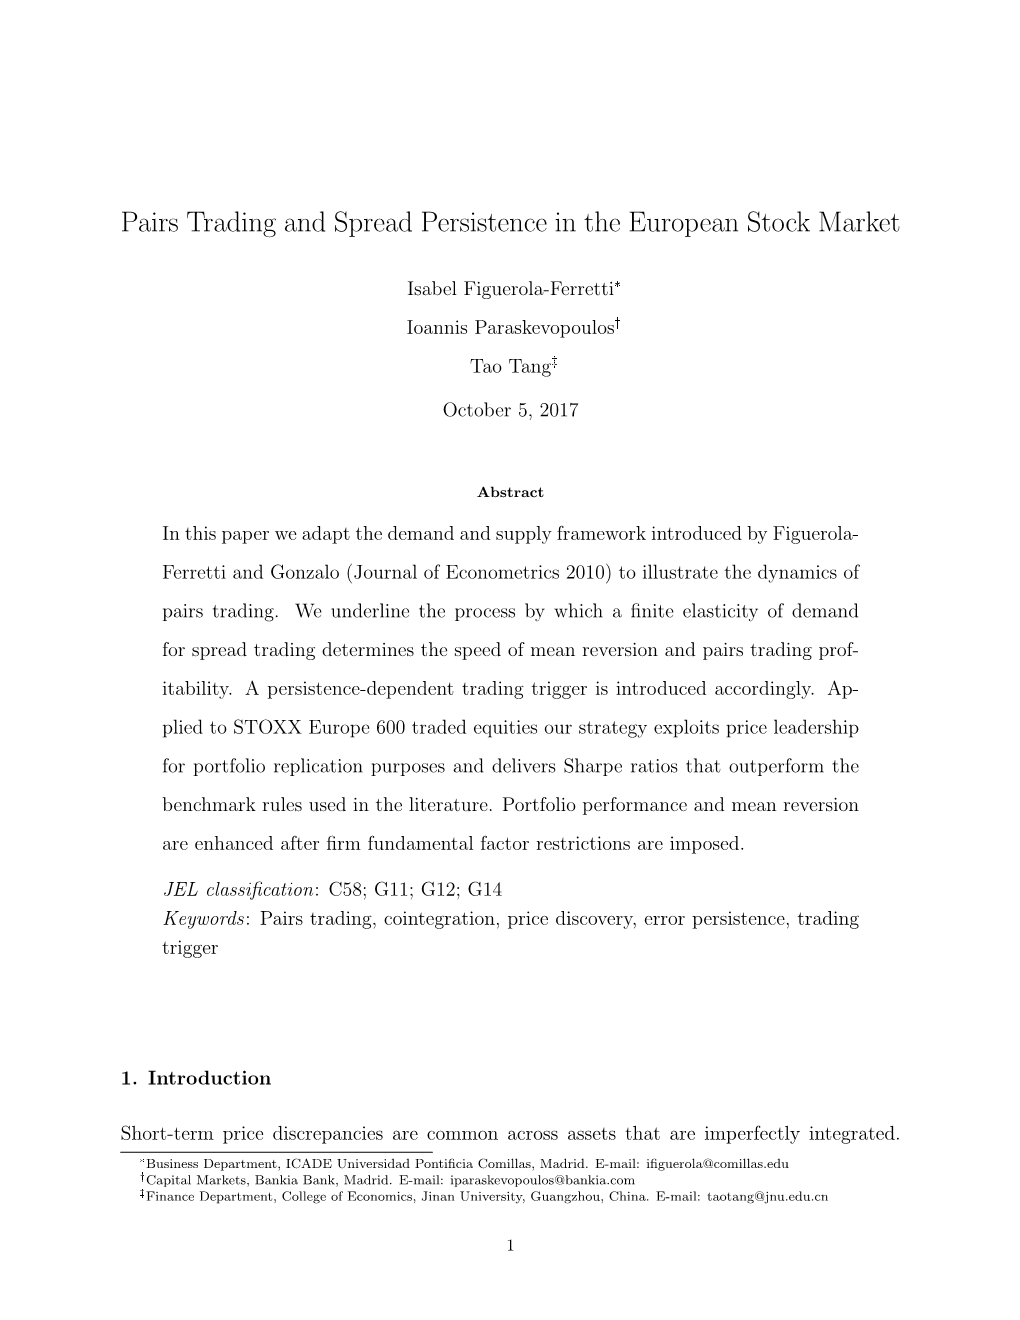 Pairs Trading and Spread Persistence in the European Stock Market